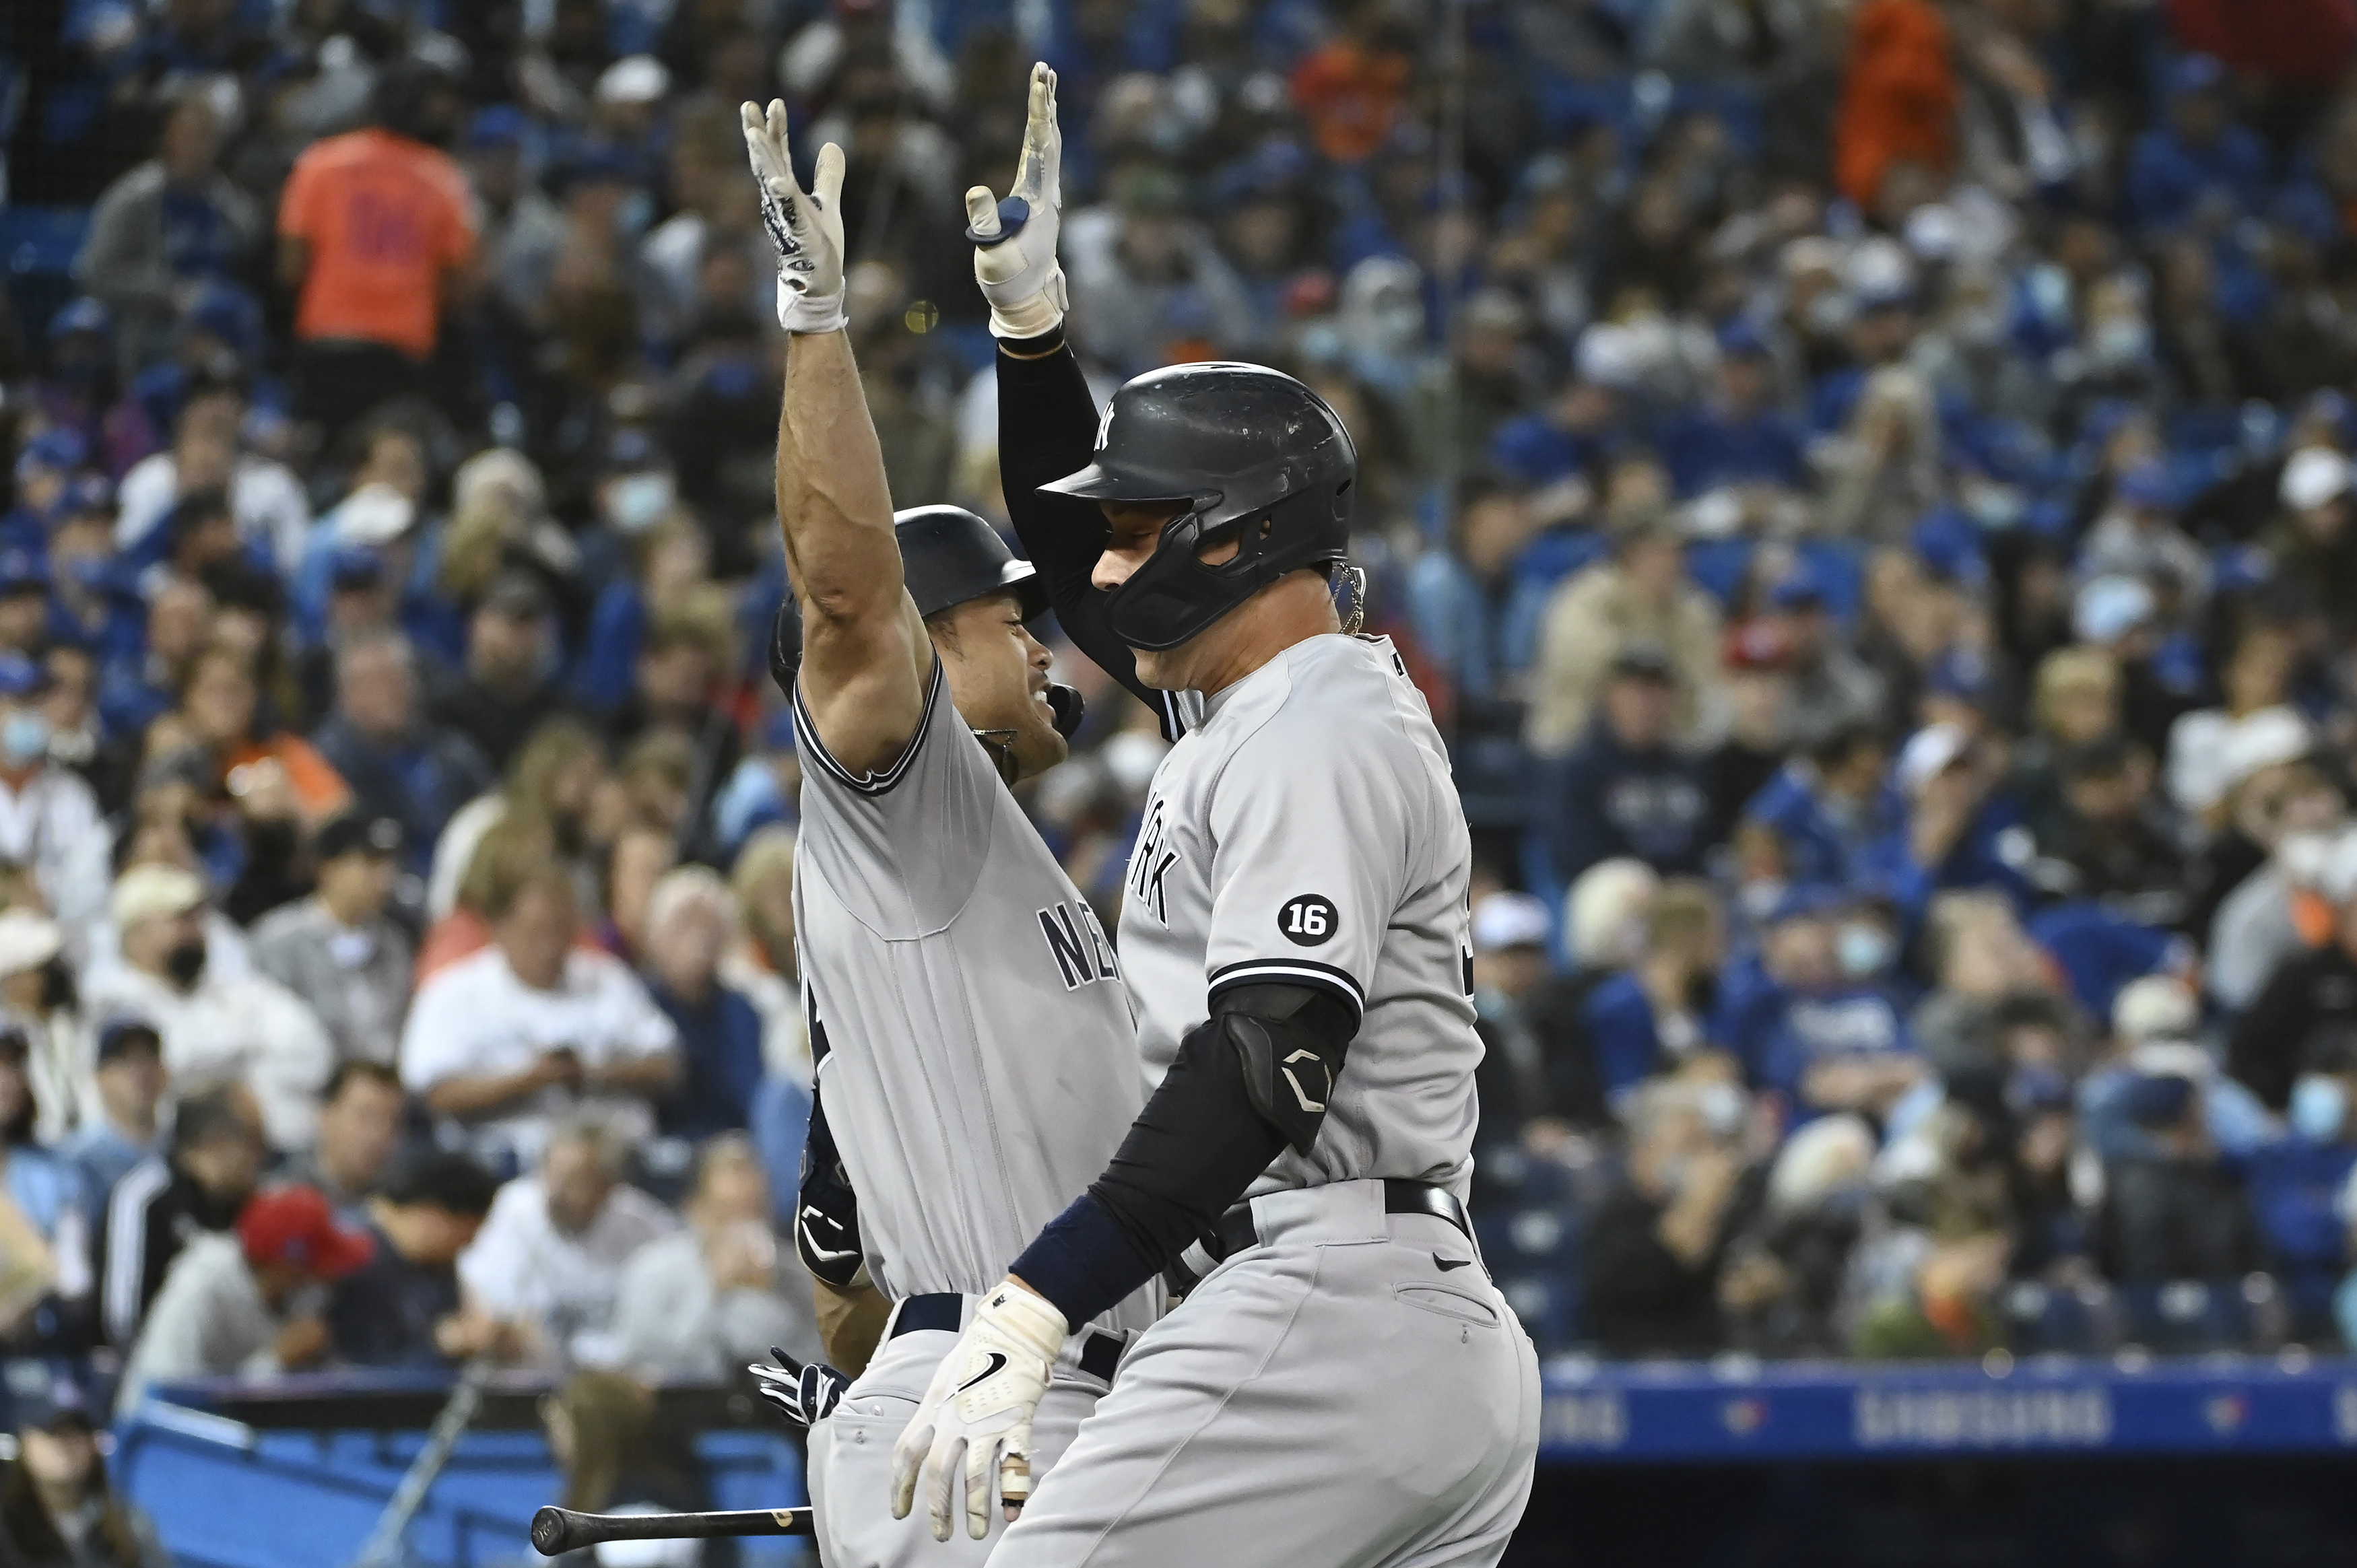 MLB playoff clinching scenarios for Yankees, Red Sox, Blue Jays